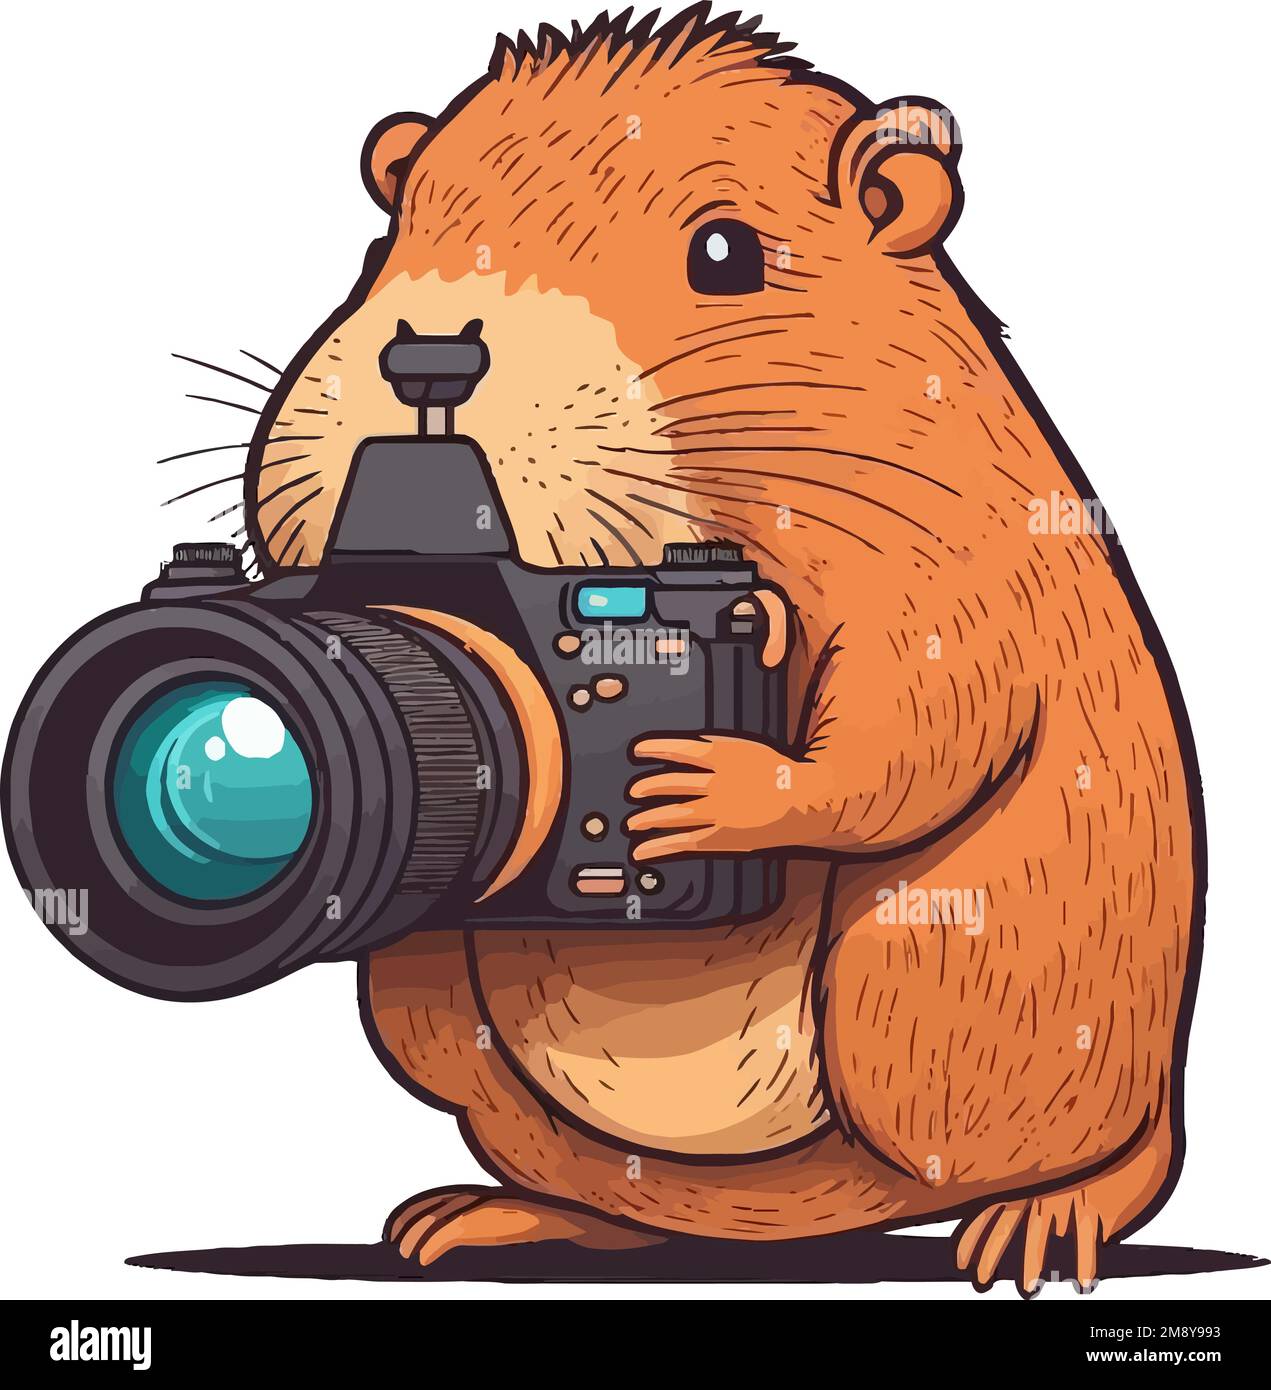 Minimalist illustration of a capybara photograph as a funny way to illustrate nature photographer or nature photography Stock Vector